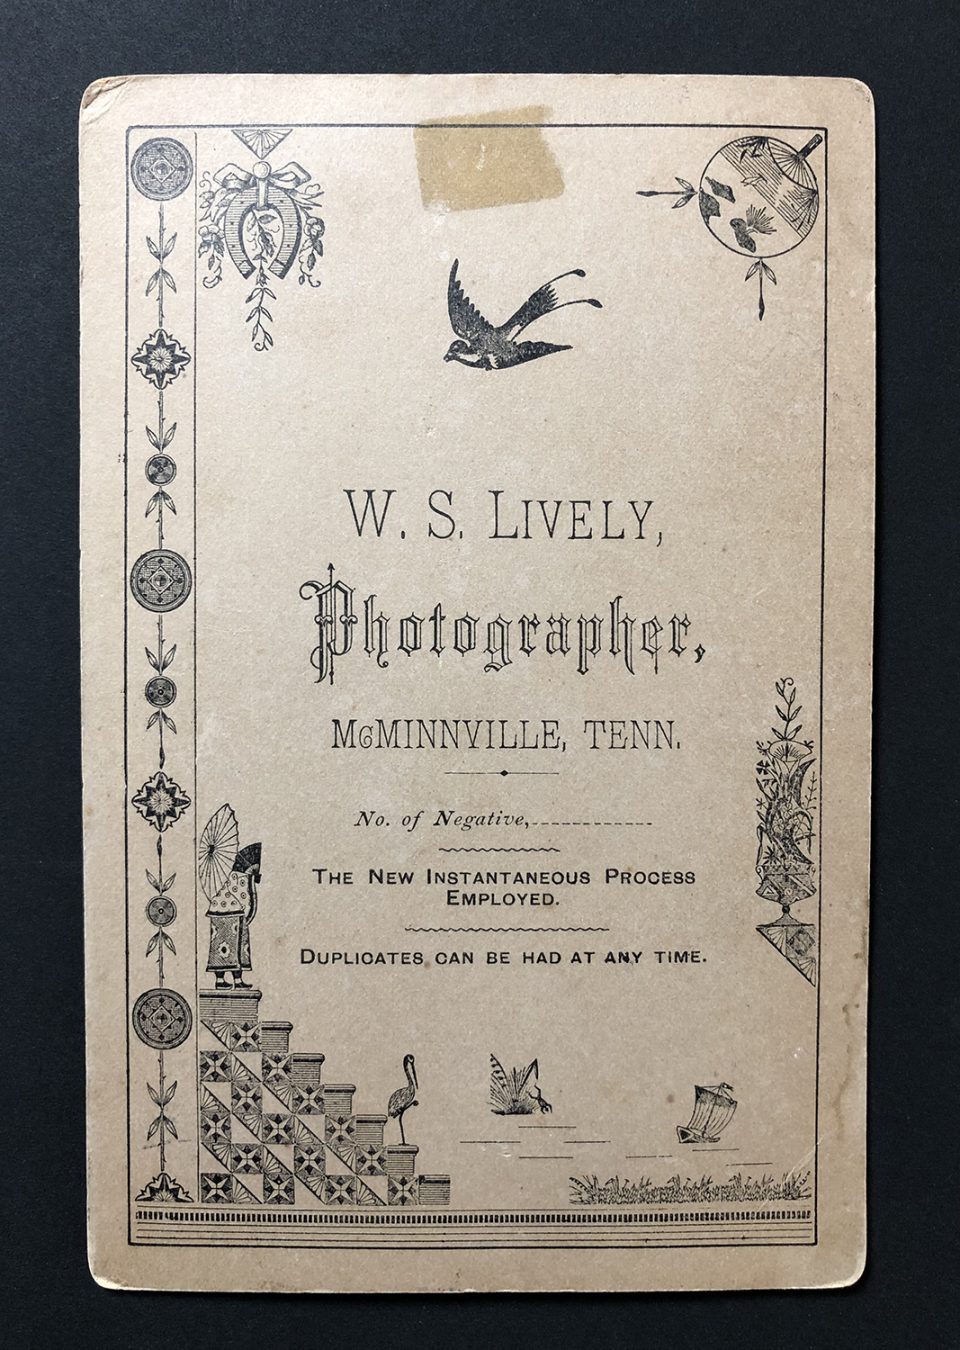 The back of the cabinet card includes fanciful woodcut clip art and the mixed and sometimes ornate styles of typography that was popular in the 1880s. 